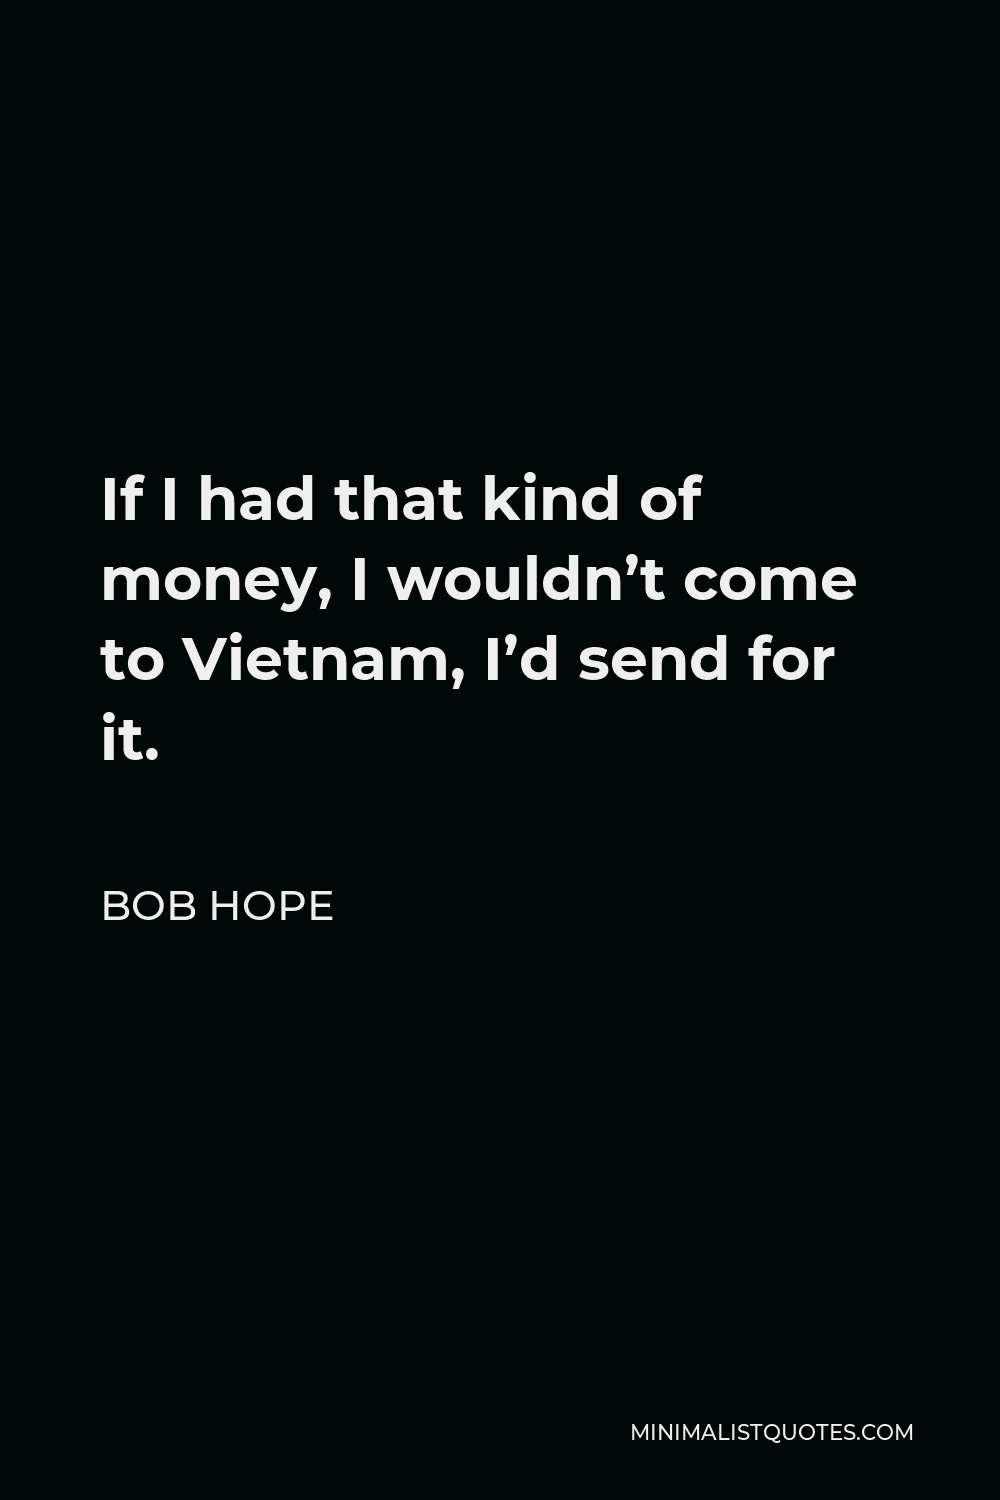 Bob Hope Quote - If I had that kind of money, I wouldn’t come to Vietnam, I’d send for it.